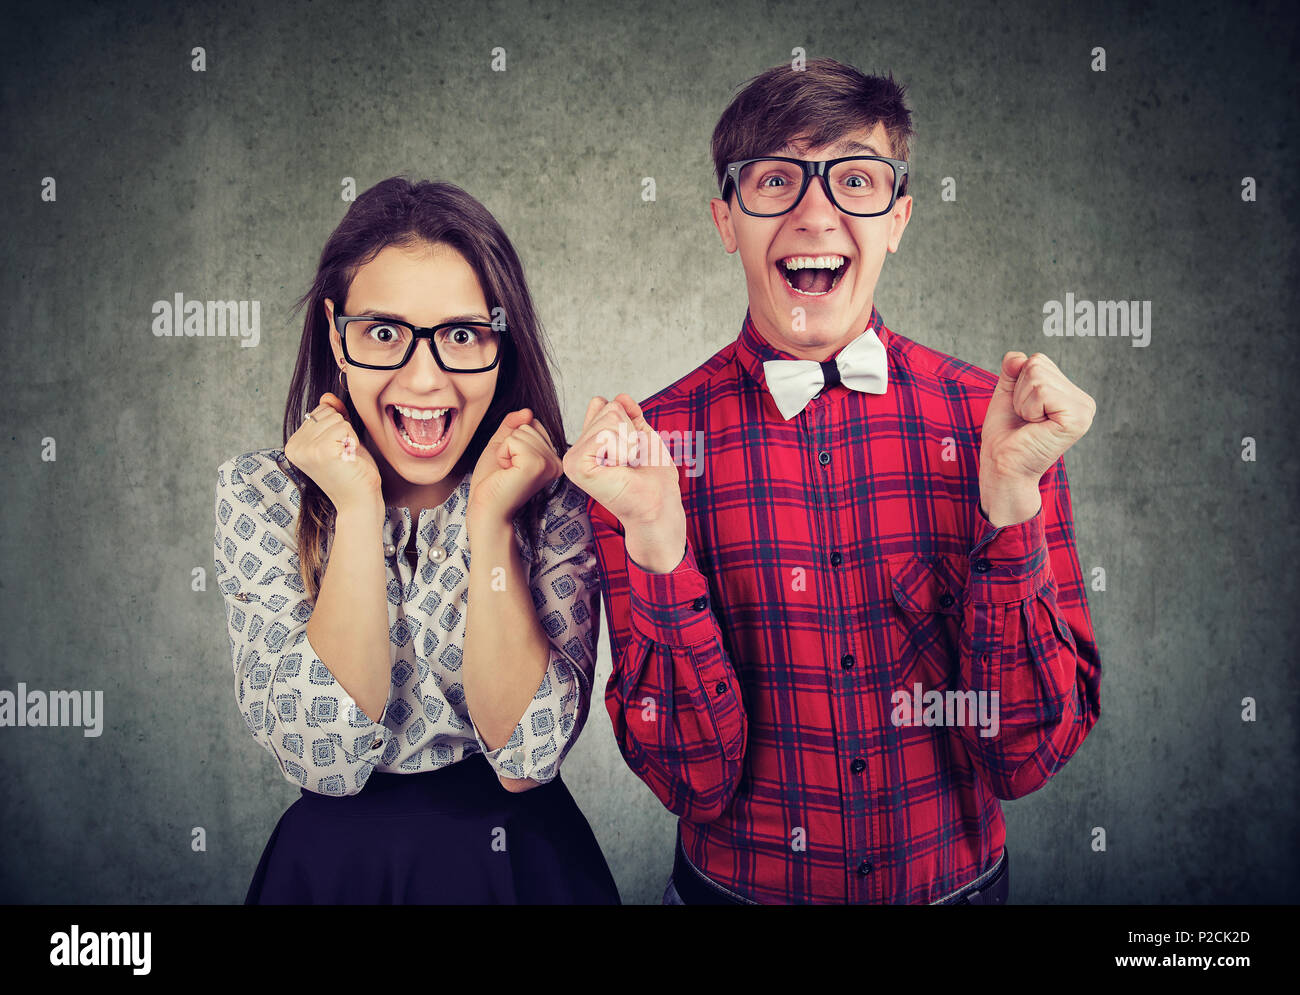 Casual young man and woman with funny expression screaming with excitement looking at camera. Stock Photo